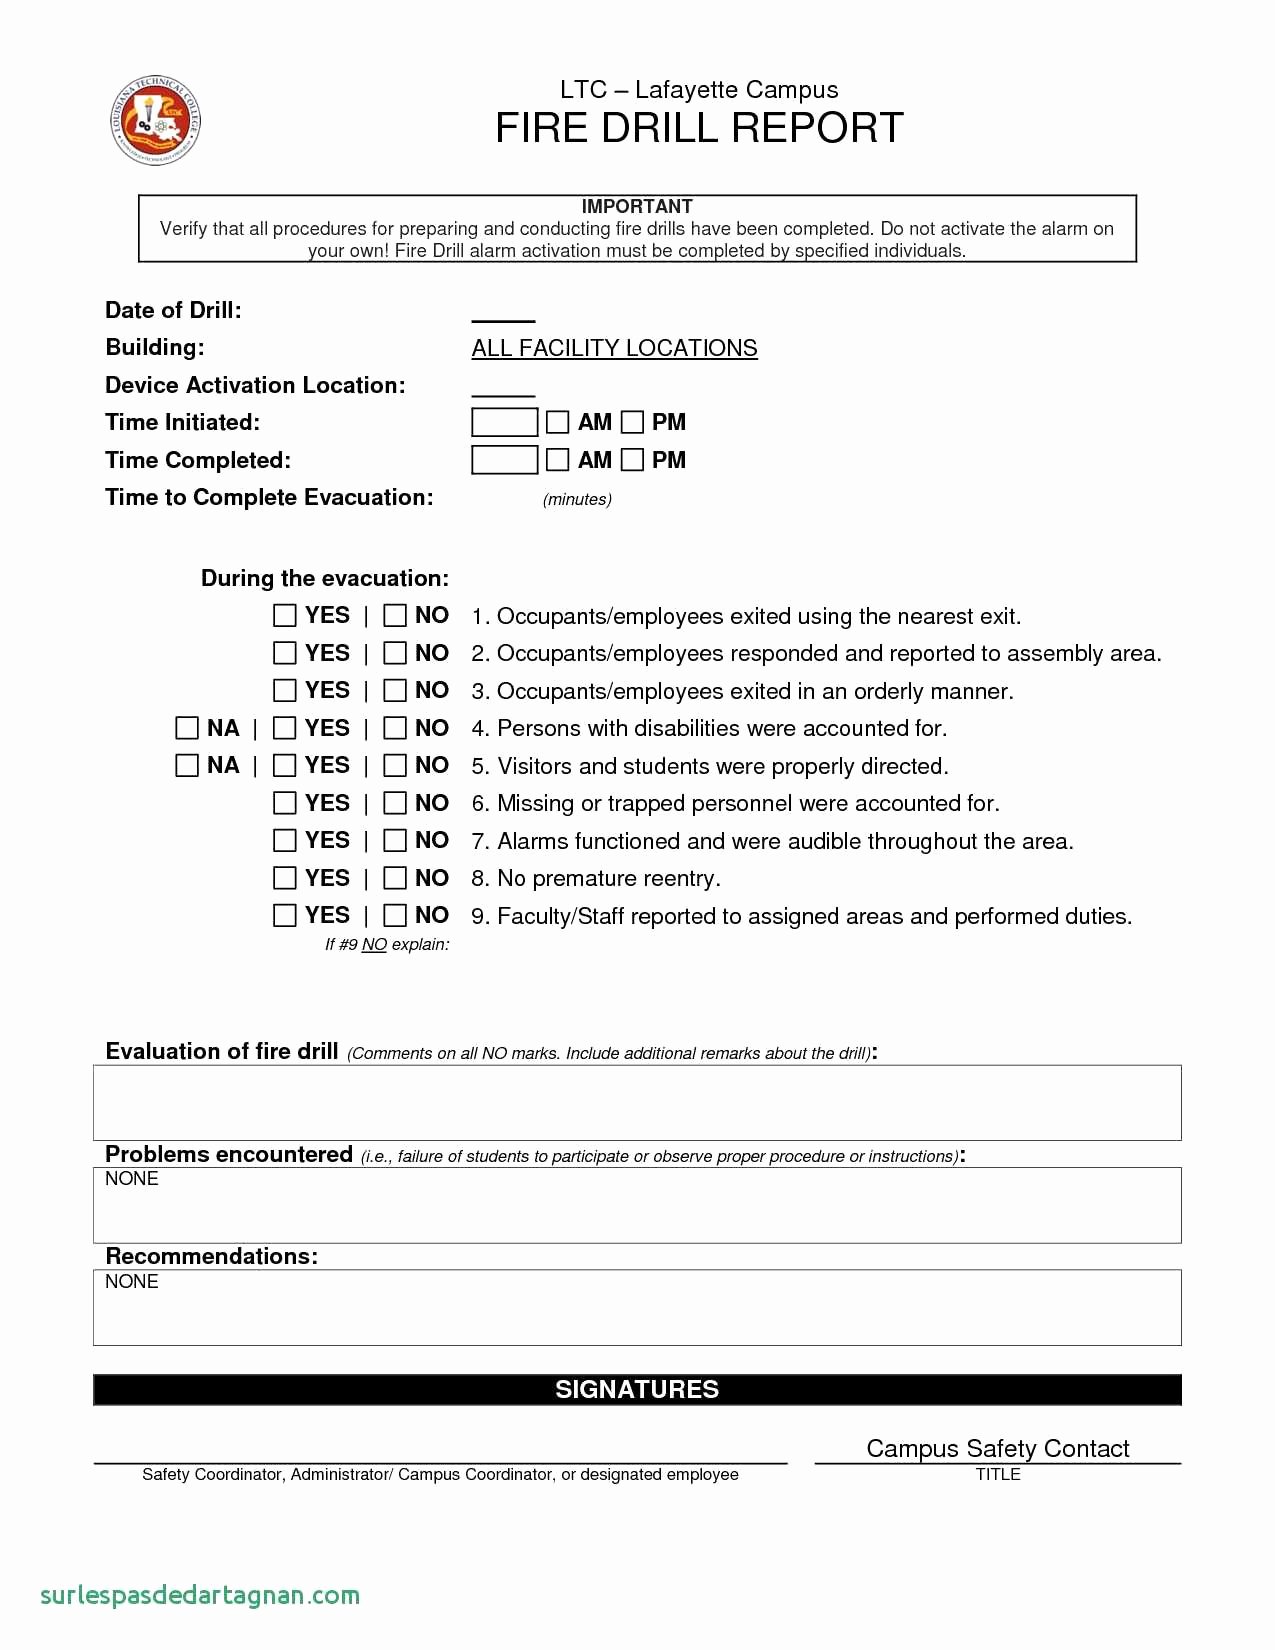 Fire Report Template Awesome Emergency Mock Drill Report format Glendale Munity